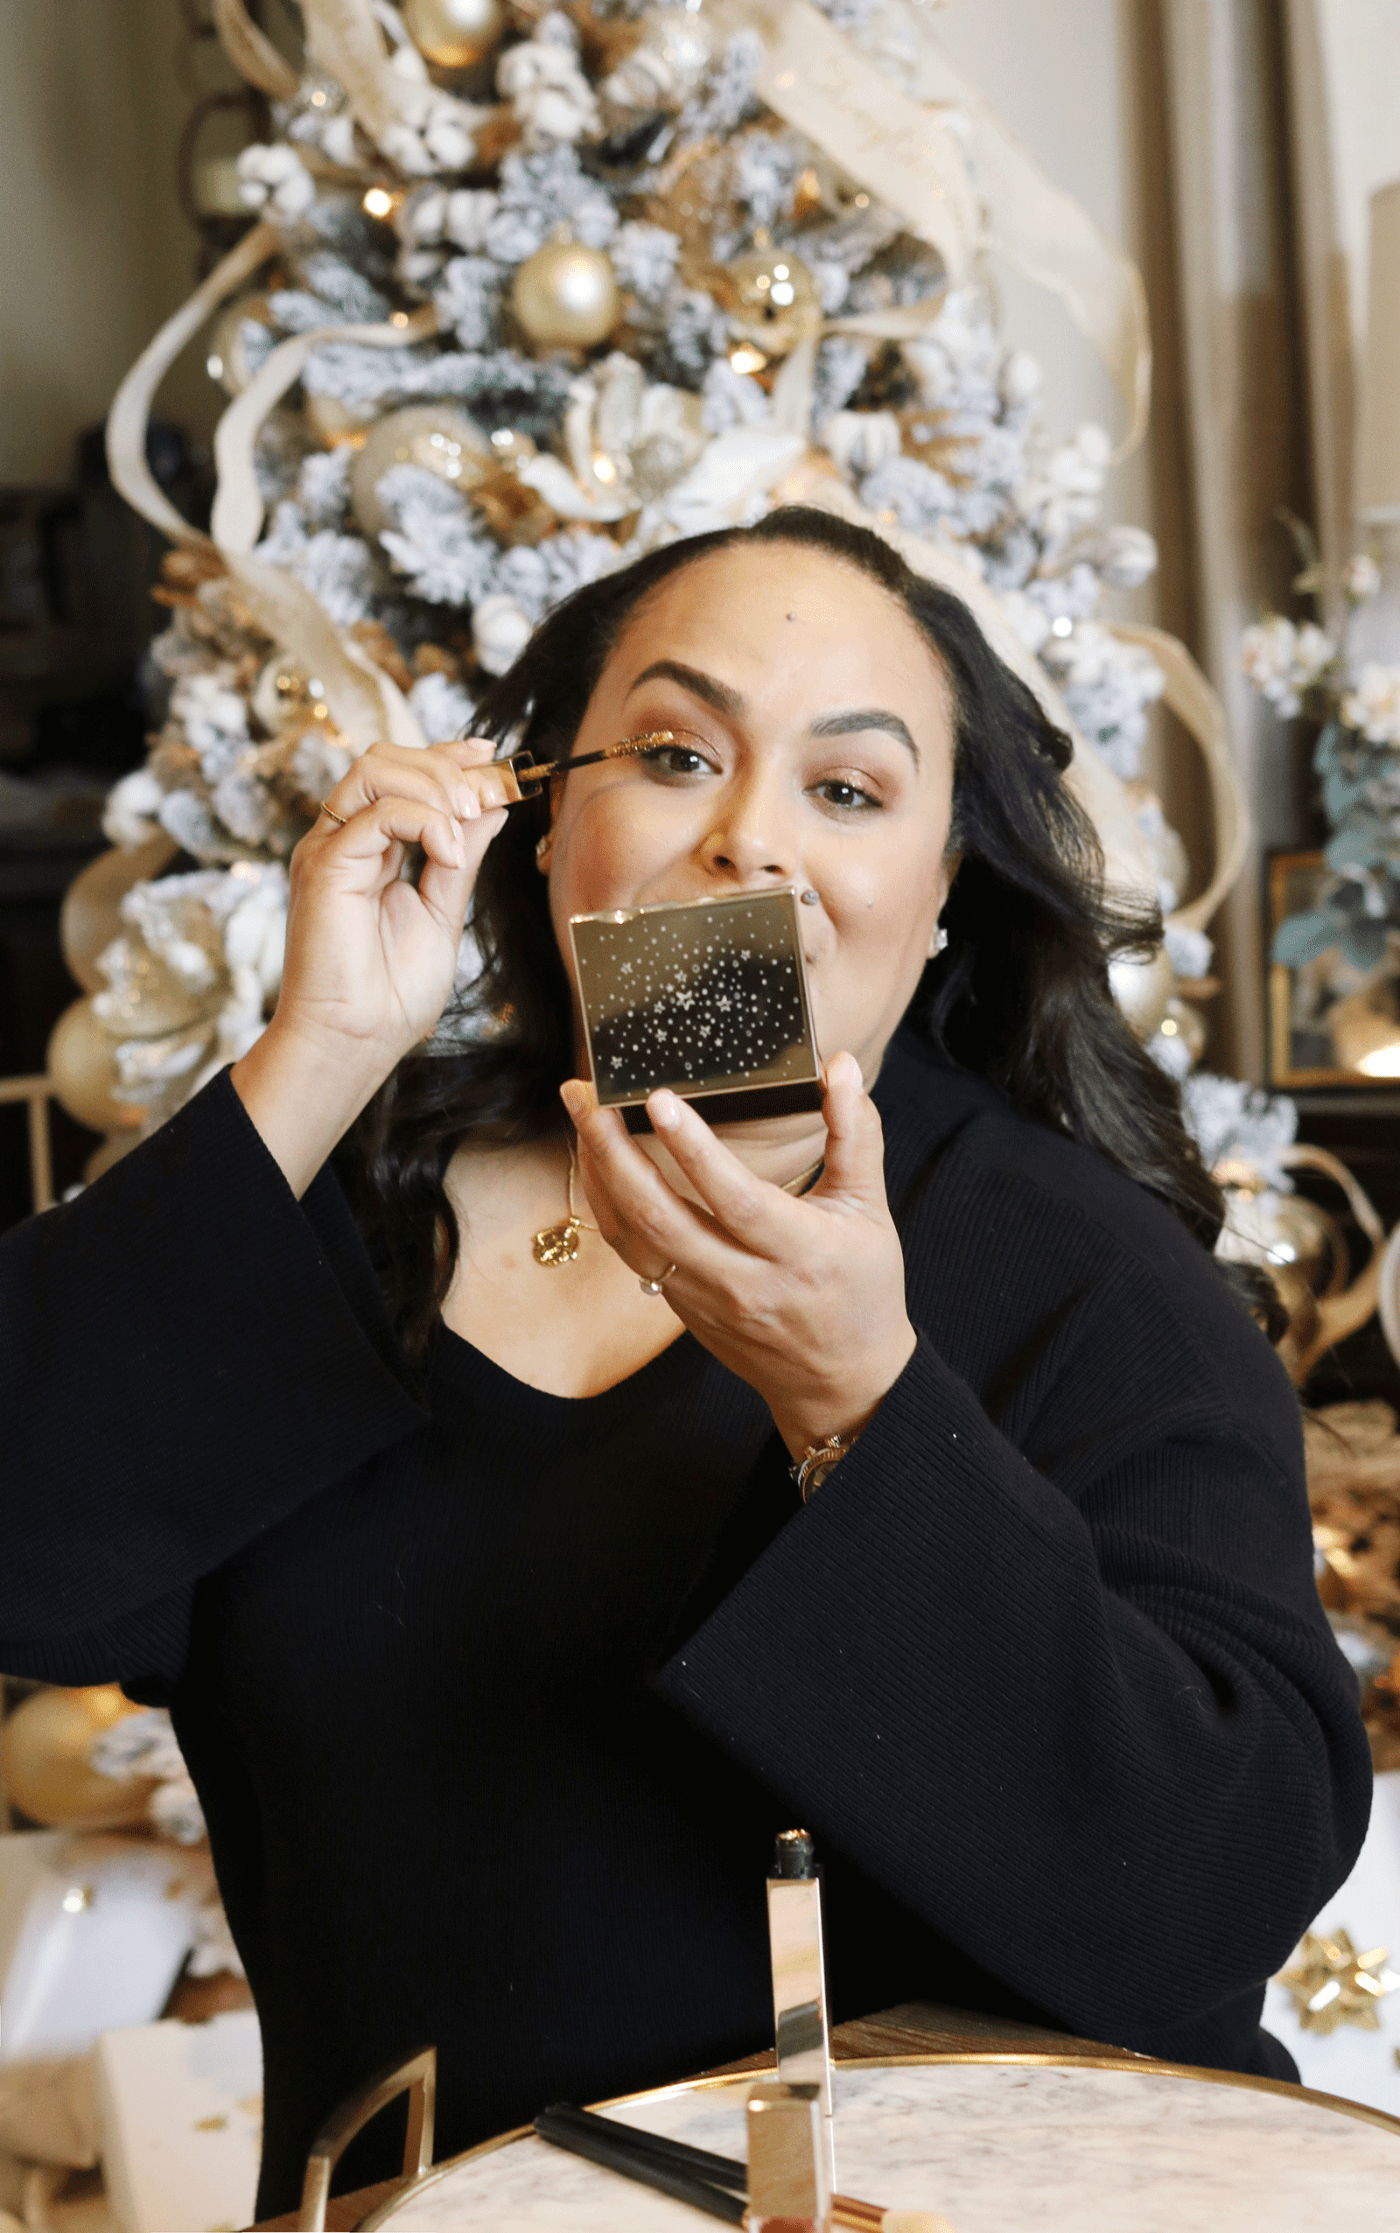 Looking for an easy holiday beauty look? Los Angeles Blogger Makeup Life and Love is sharing her easy holiday beauty look in 3 easy steps thanks to Clarins Shimmer and Shine collection! See them here!